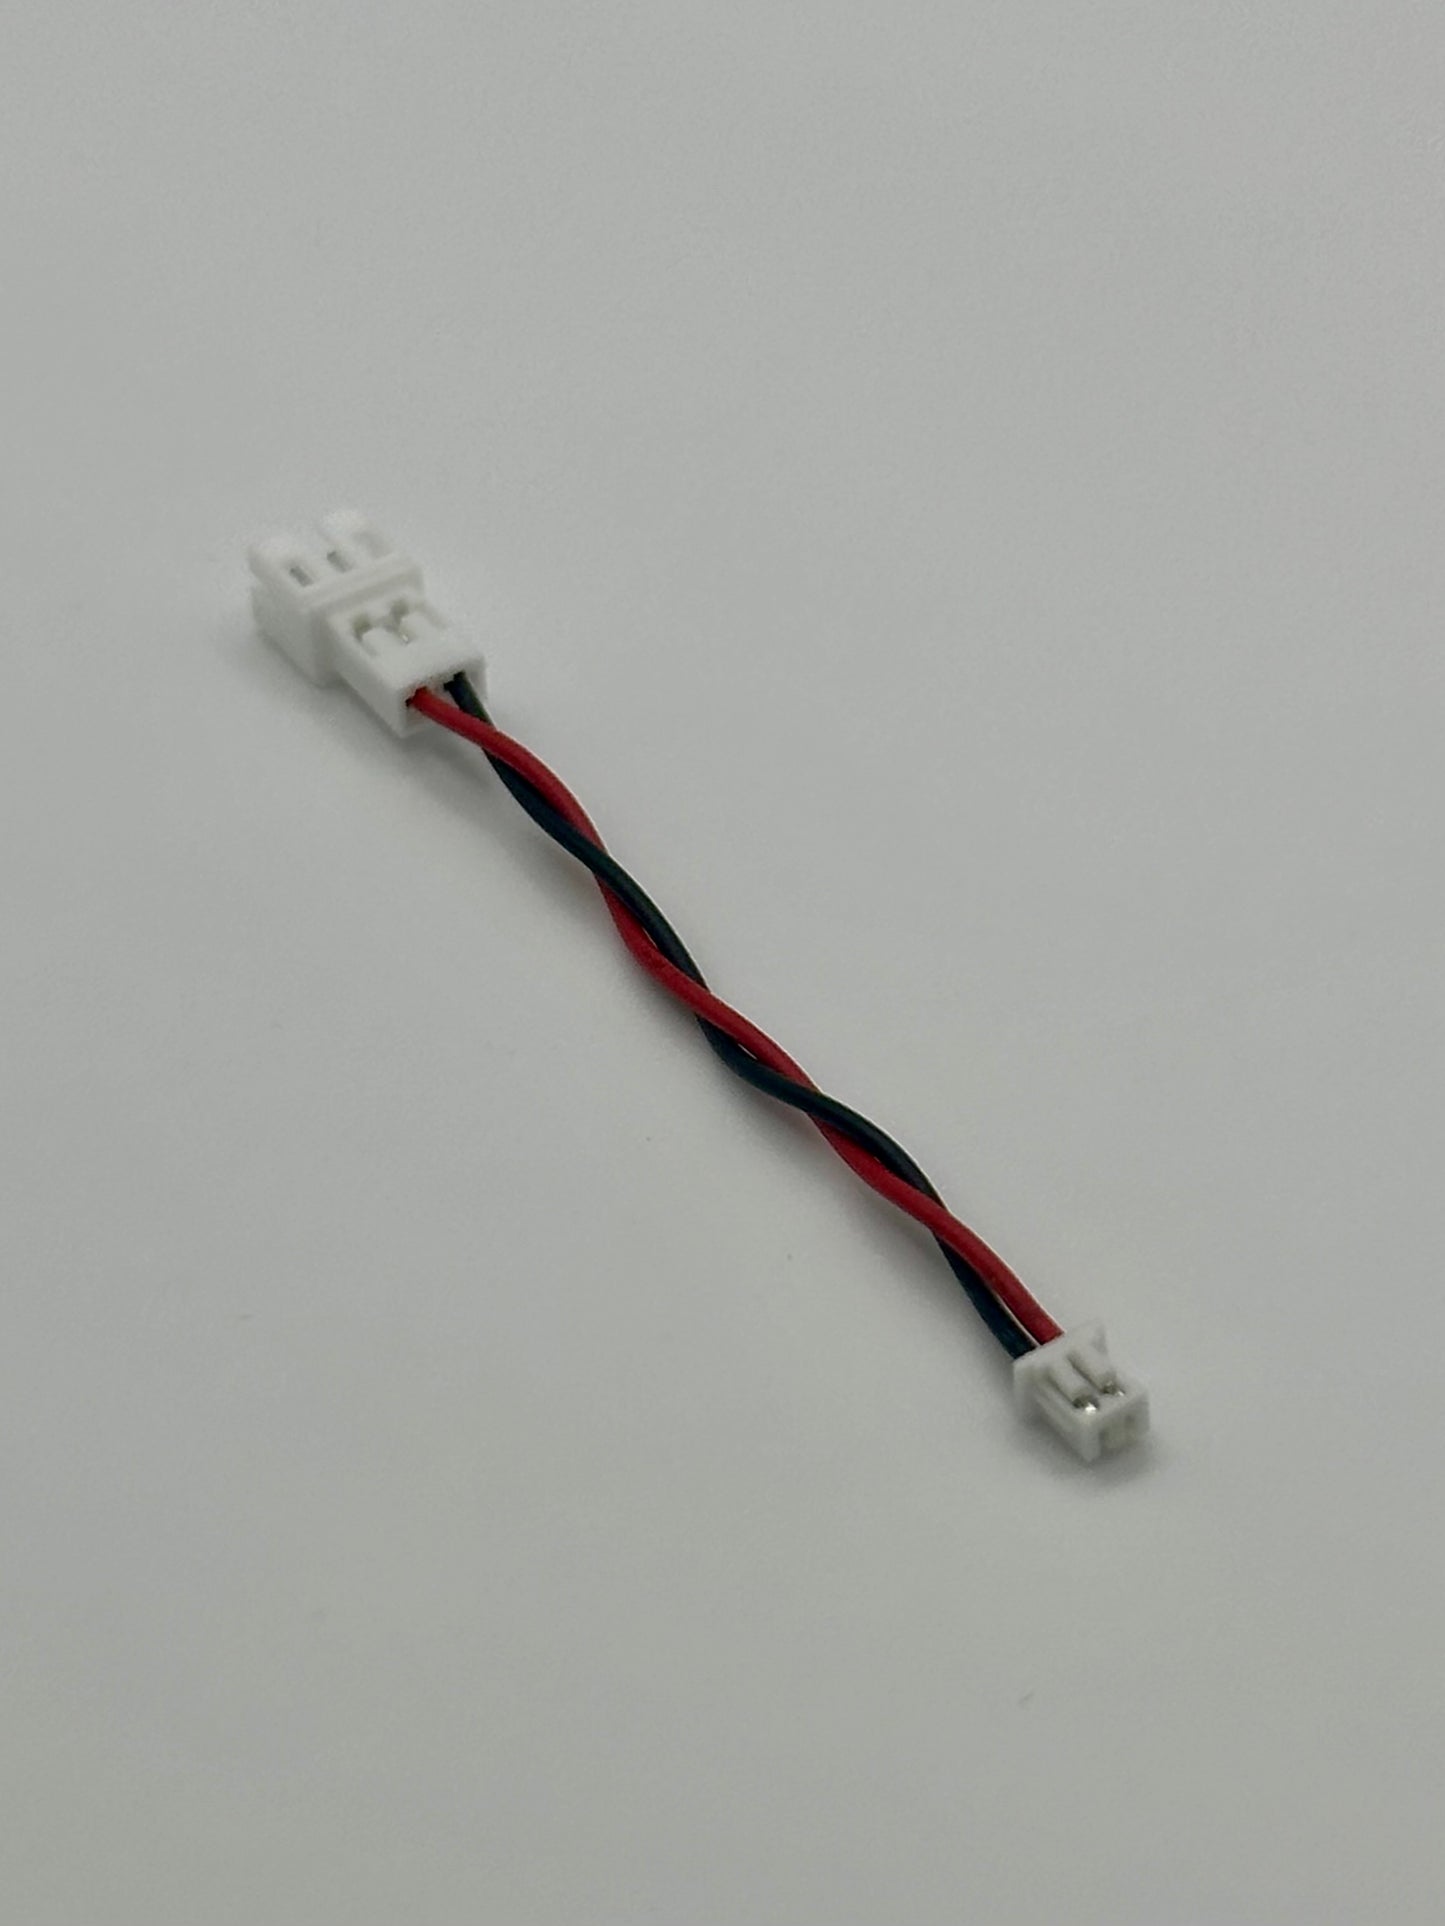 Plug & Play JST-SH 1.25mm Female to JST-PHR 2mm Male Battery Adapter Cable (Works with EEMB 3.7v LiPo)